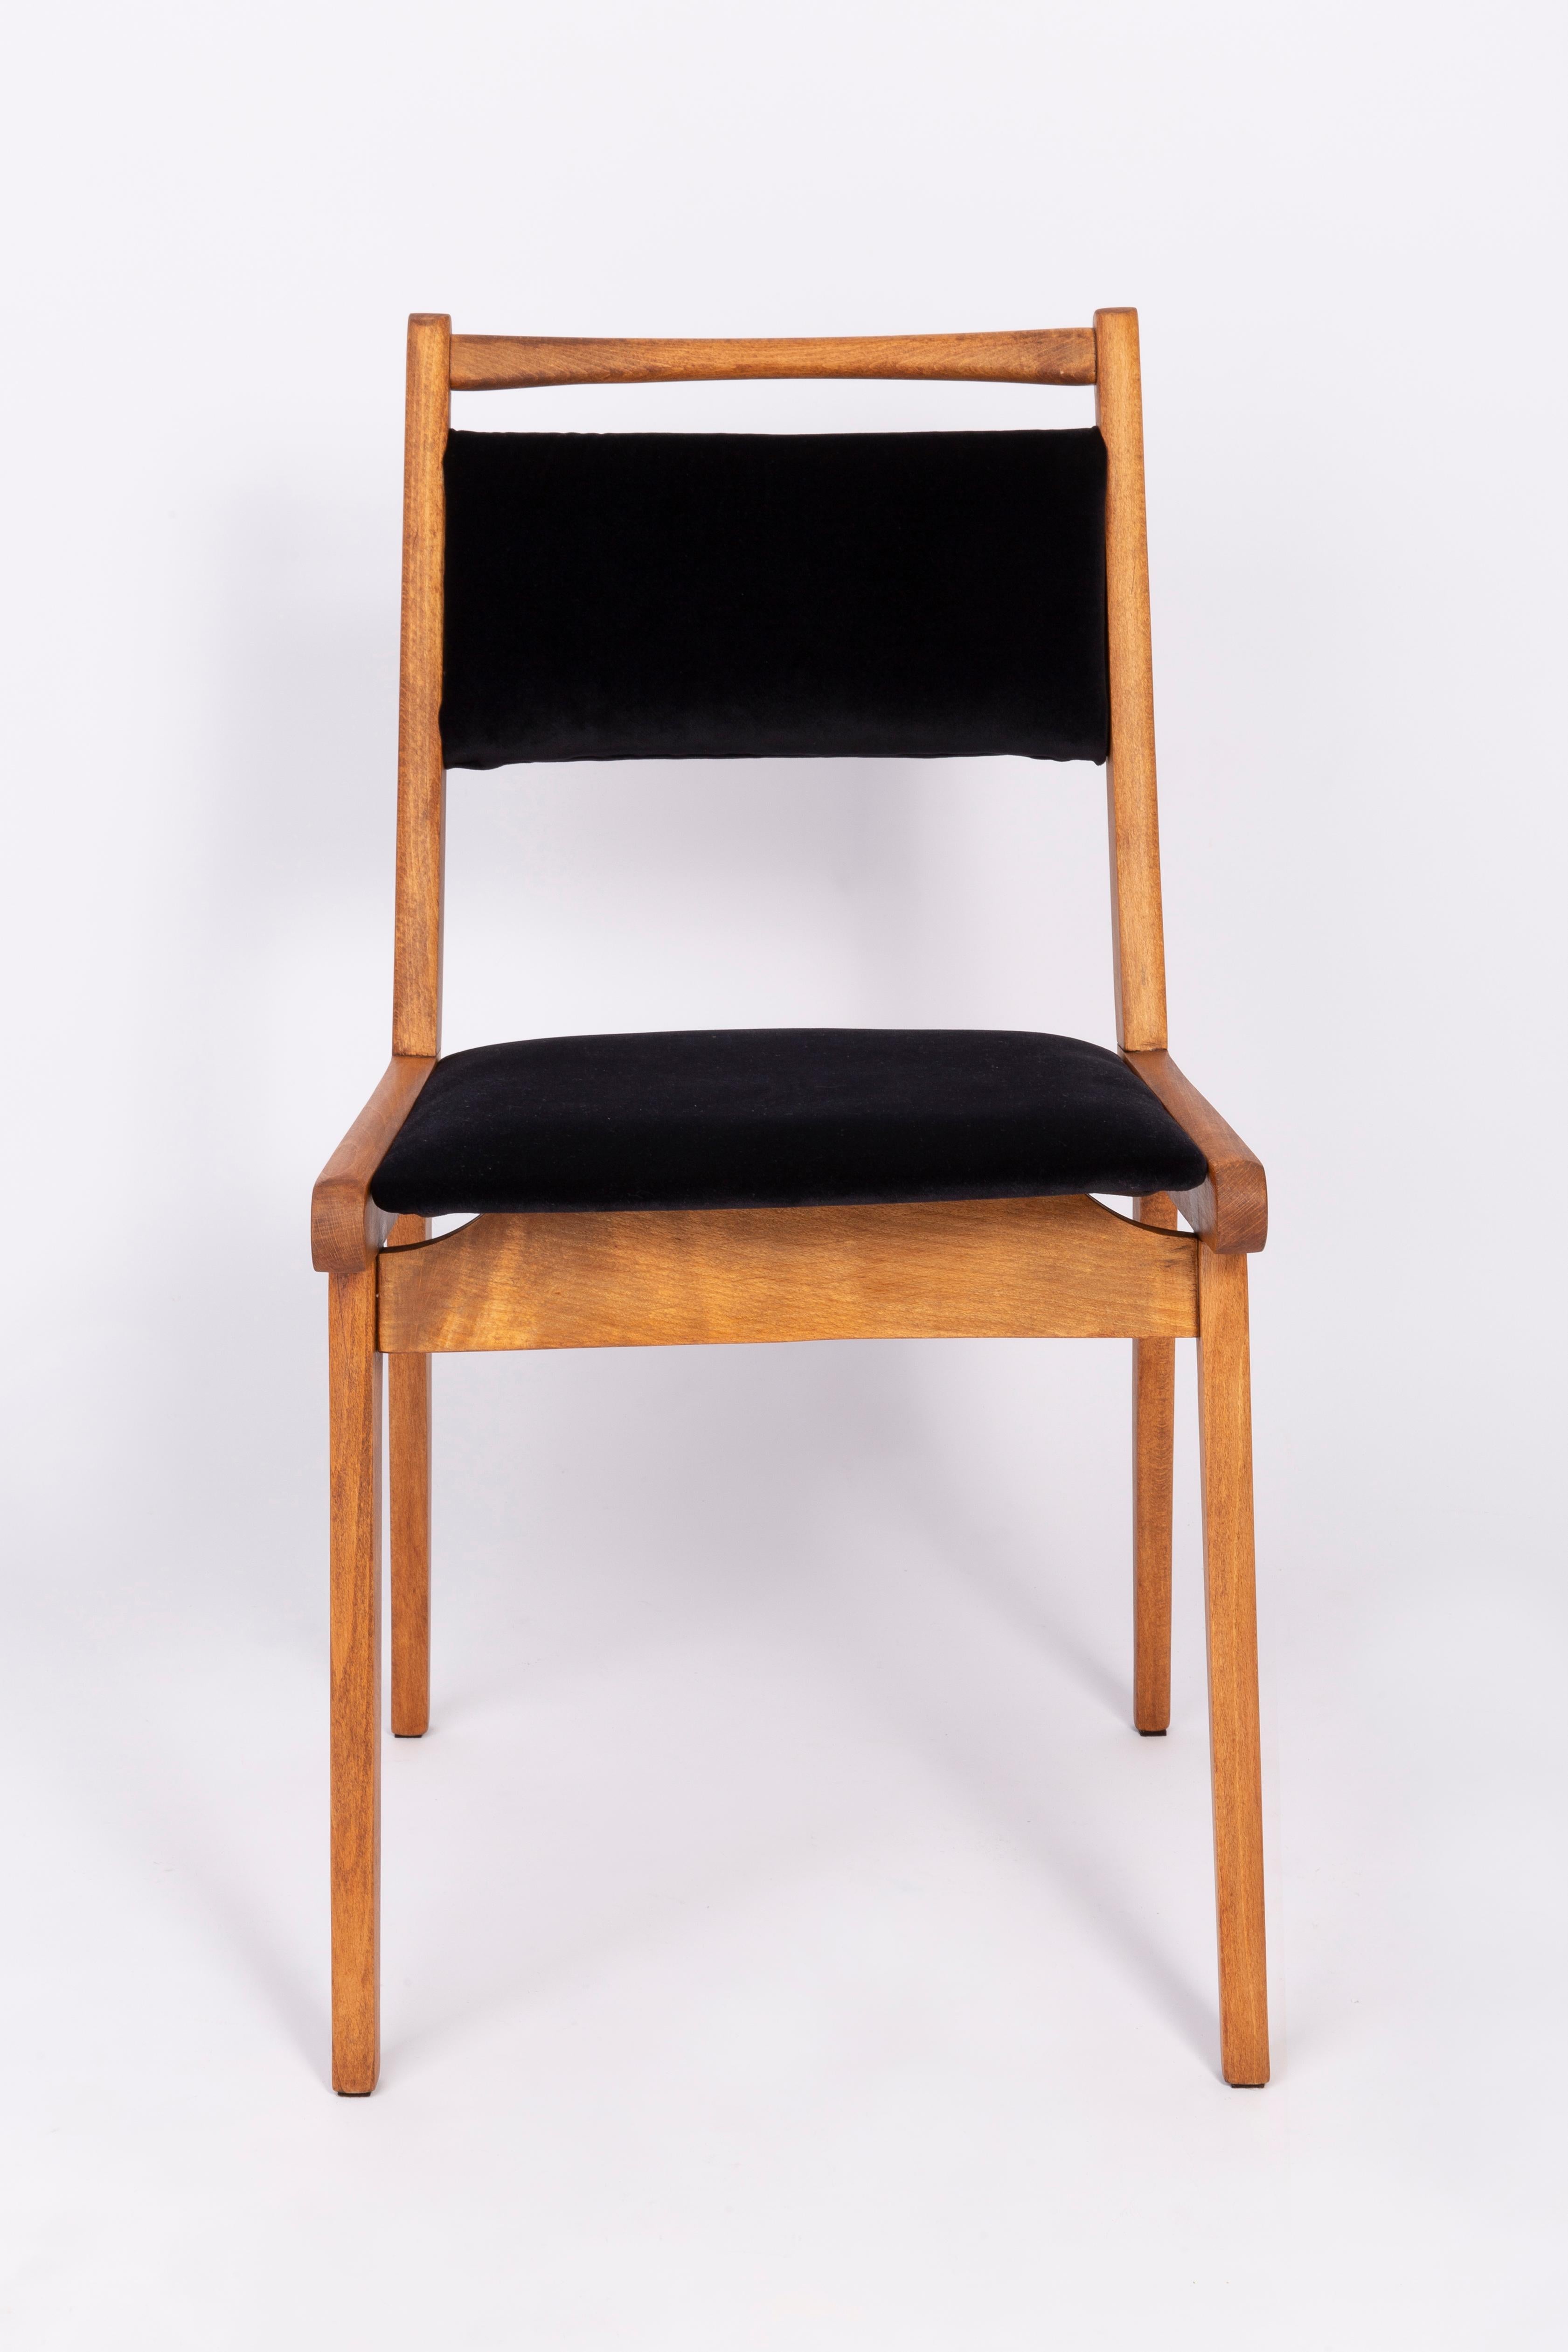 Set of Two 20th Century Black and Blue Velvet Chairs, Poland, 1960s For Sale 4